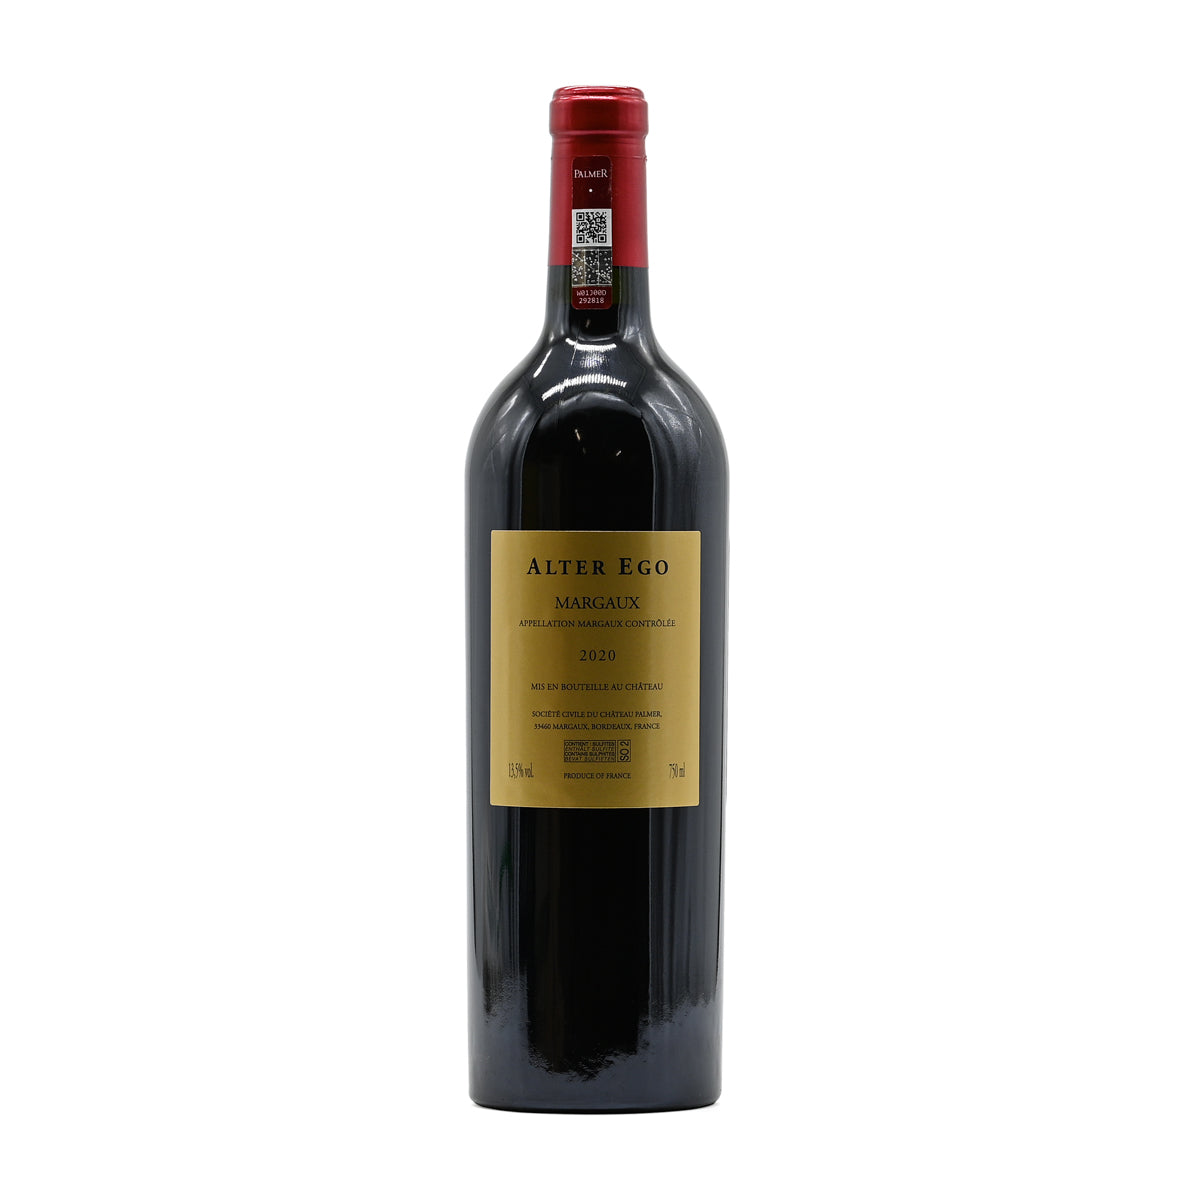 Alter Ego de Palmer 2020, 750ml French red wine, made from a blend of Cabernet Sauvignon, Merlot and Petit Verdot; from Margaux, Bordeaux, France – GDV Fine Wines, Hong Kong